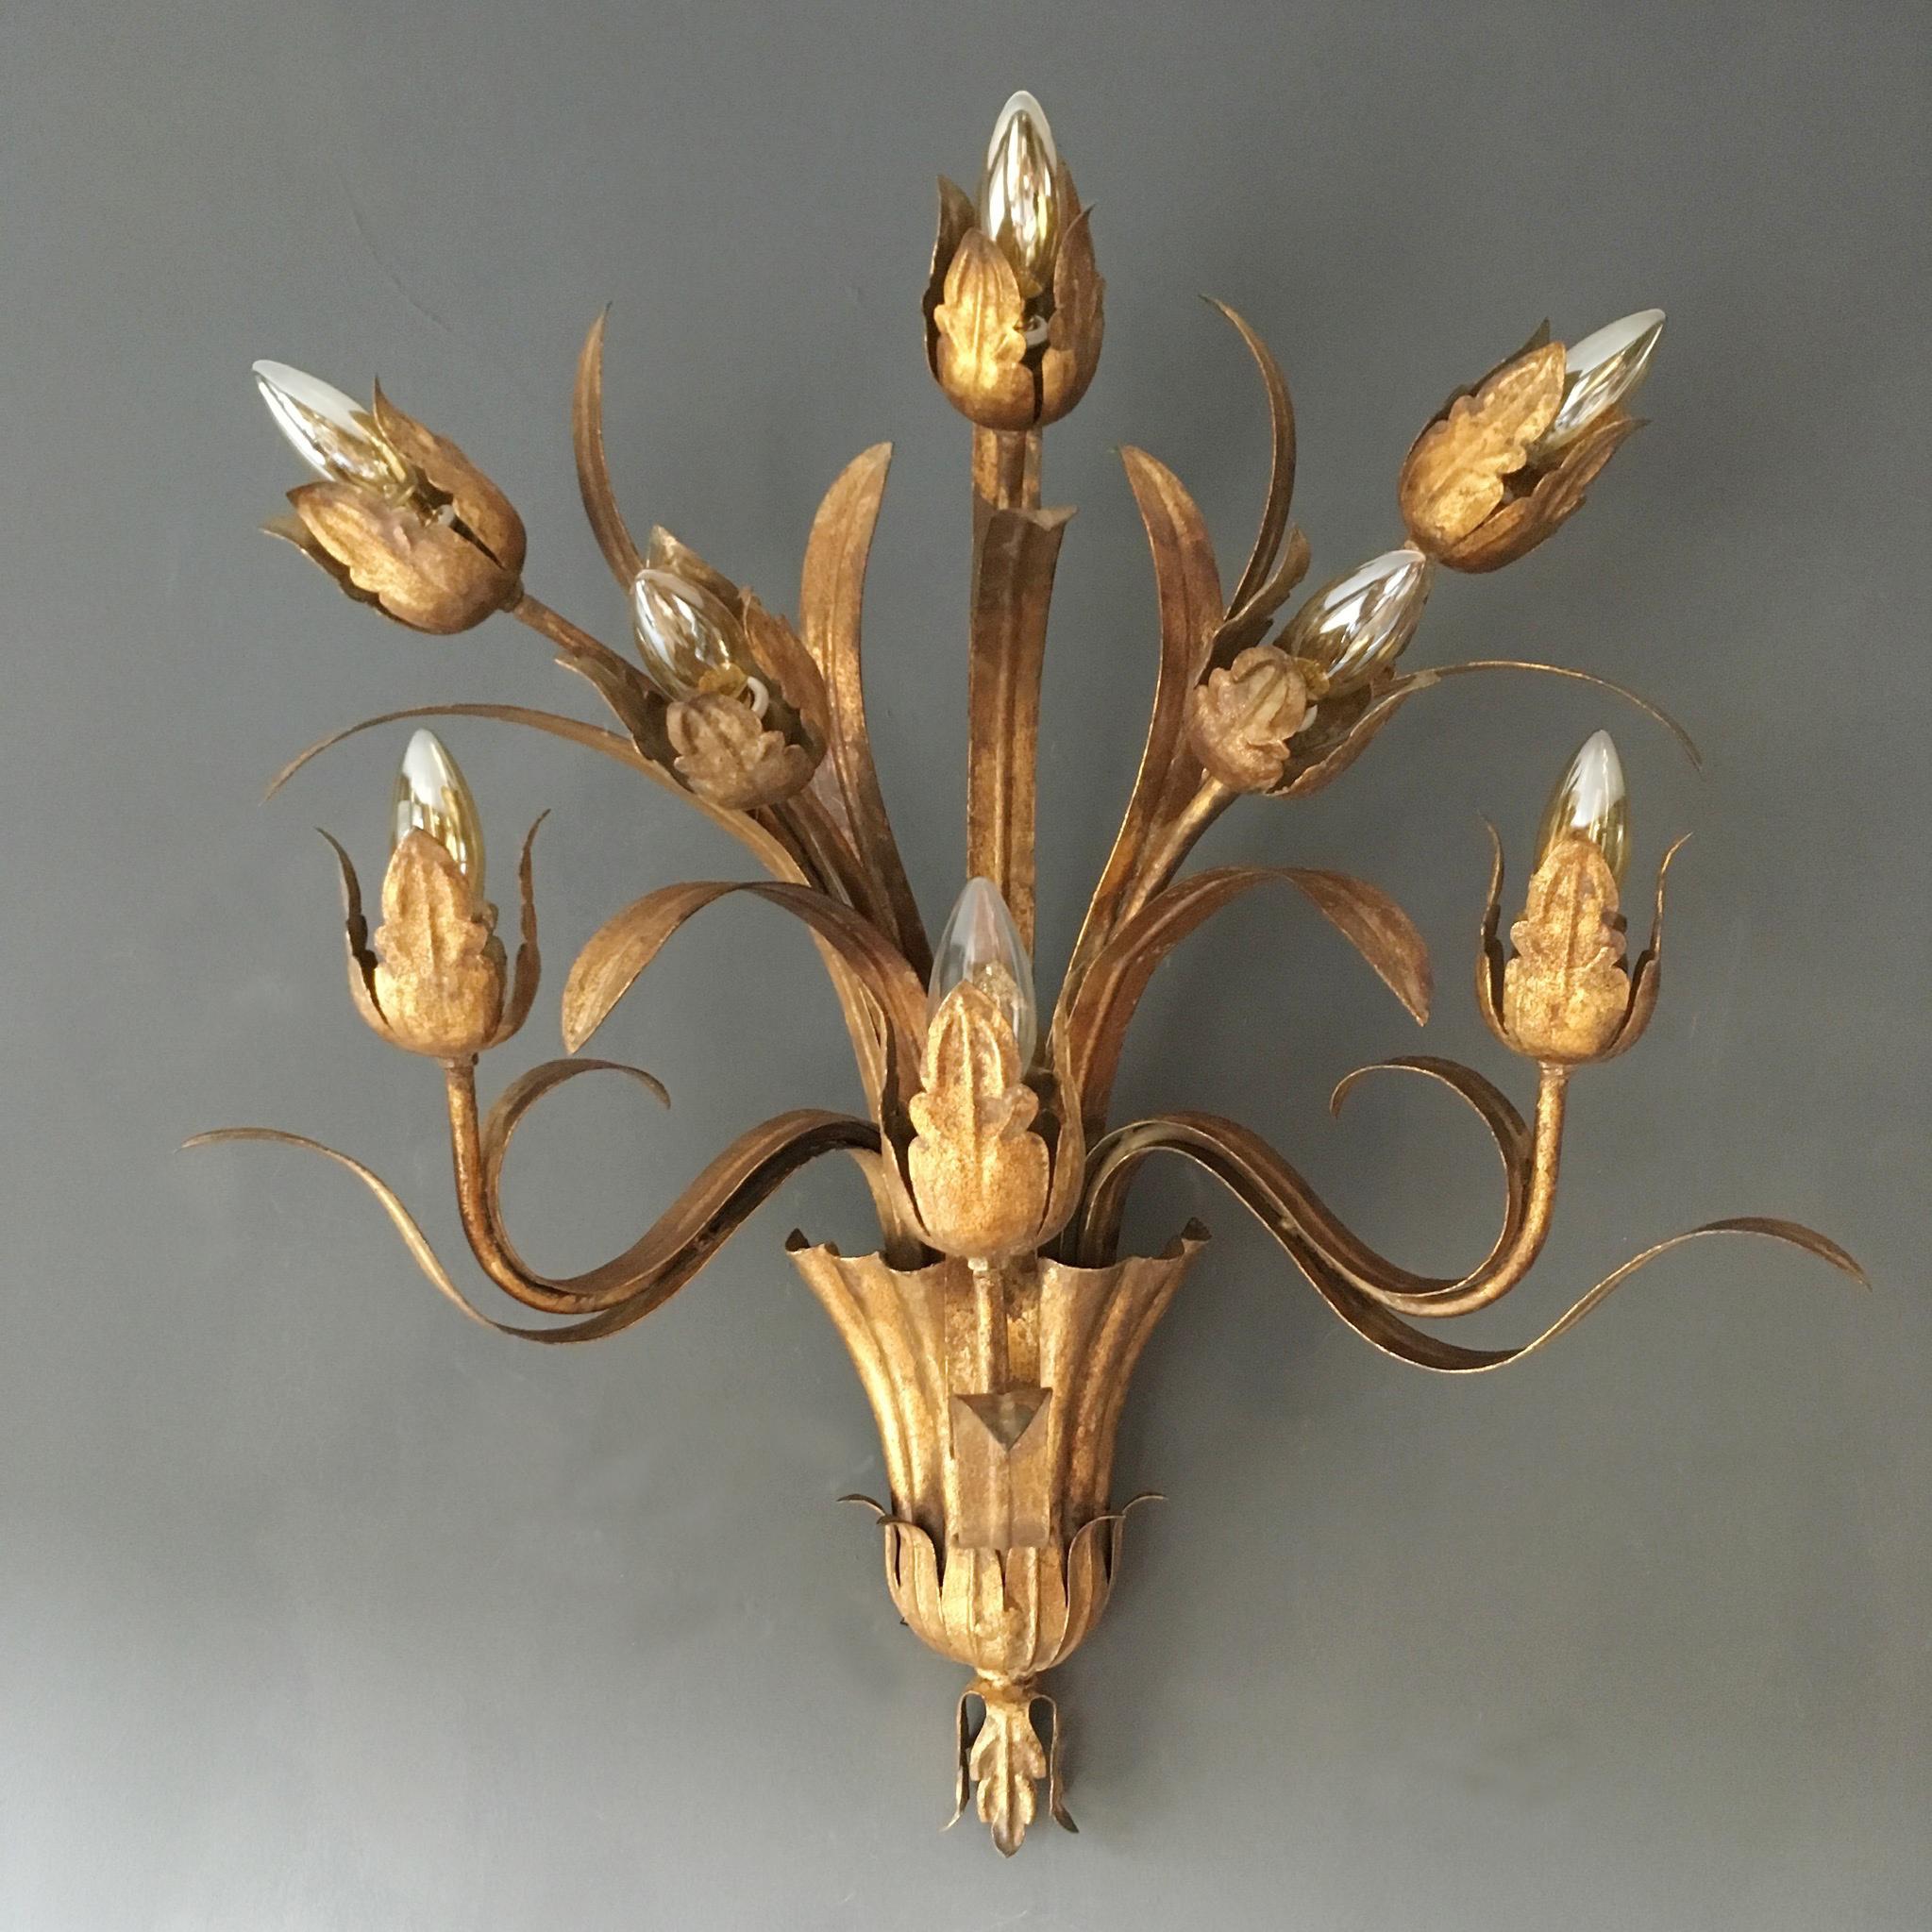 Huge Spanish flower bud wall sconce.

This is a very large and heavy wall sconce, made from gilt iron it weighs 3.5kg.

Dimensions:
75cm height
61cm width
41cm depth.

The design is beautiful with 8 large flower buds/tulips reaching up